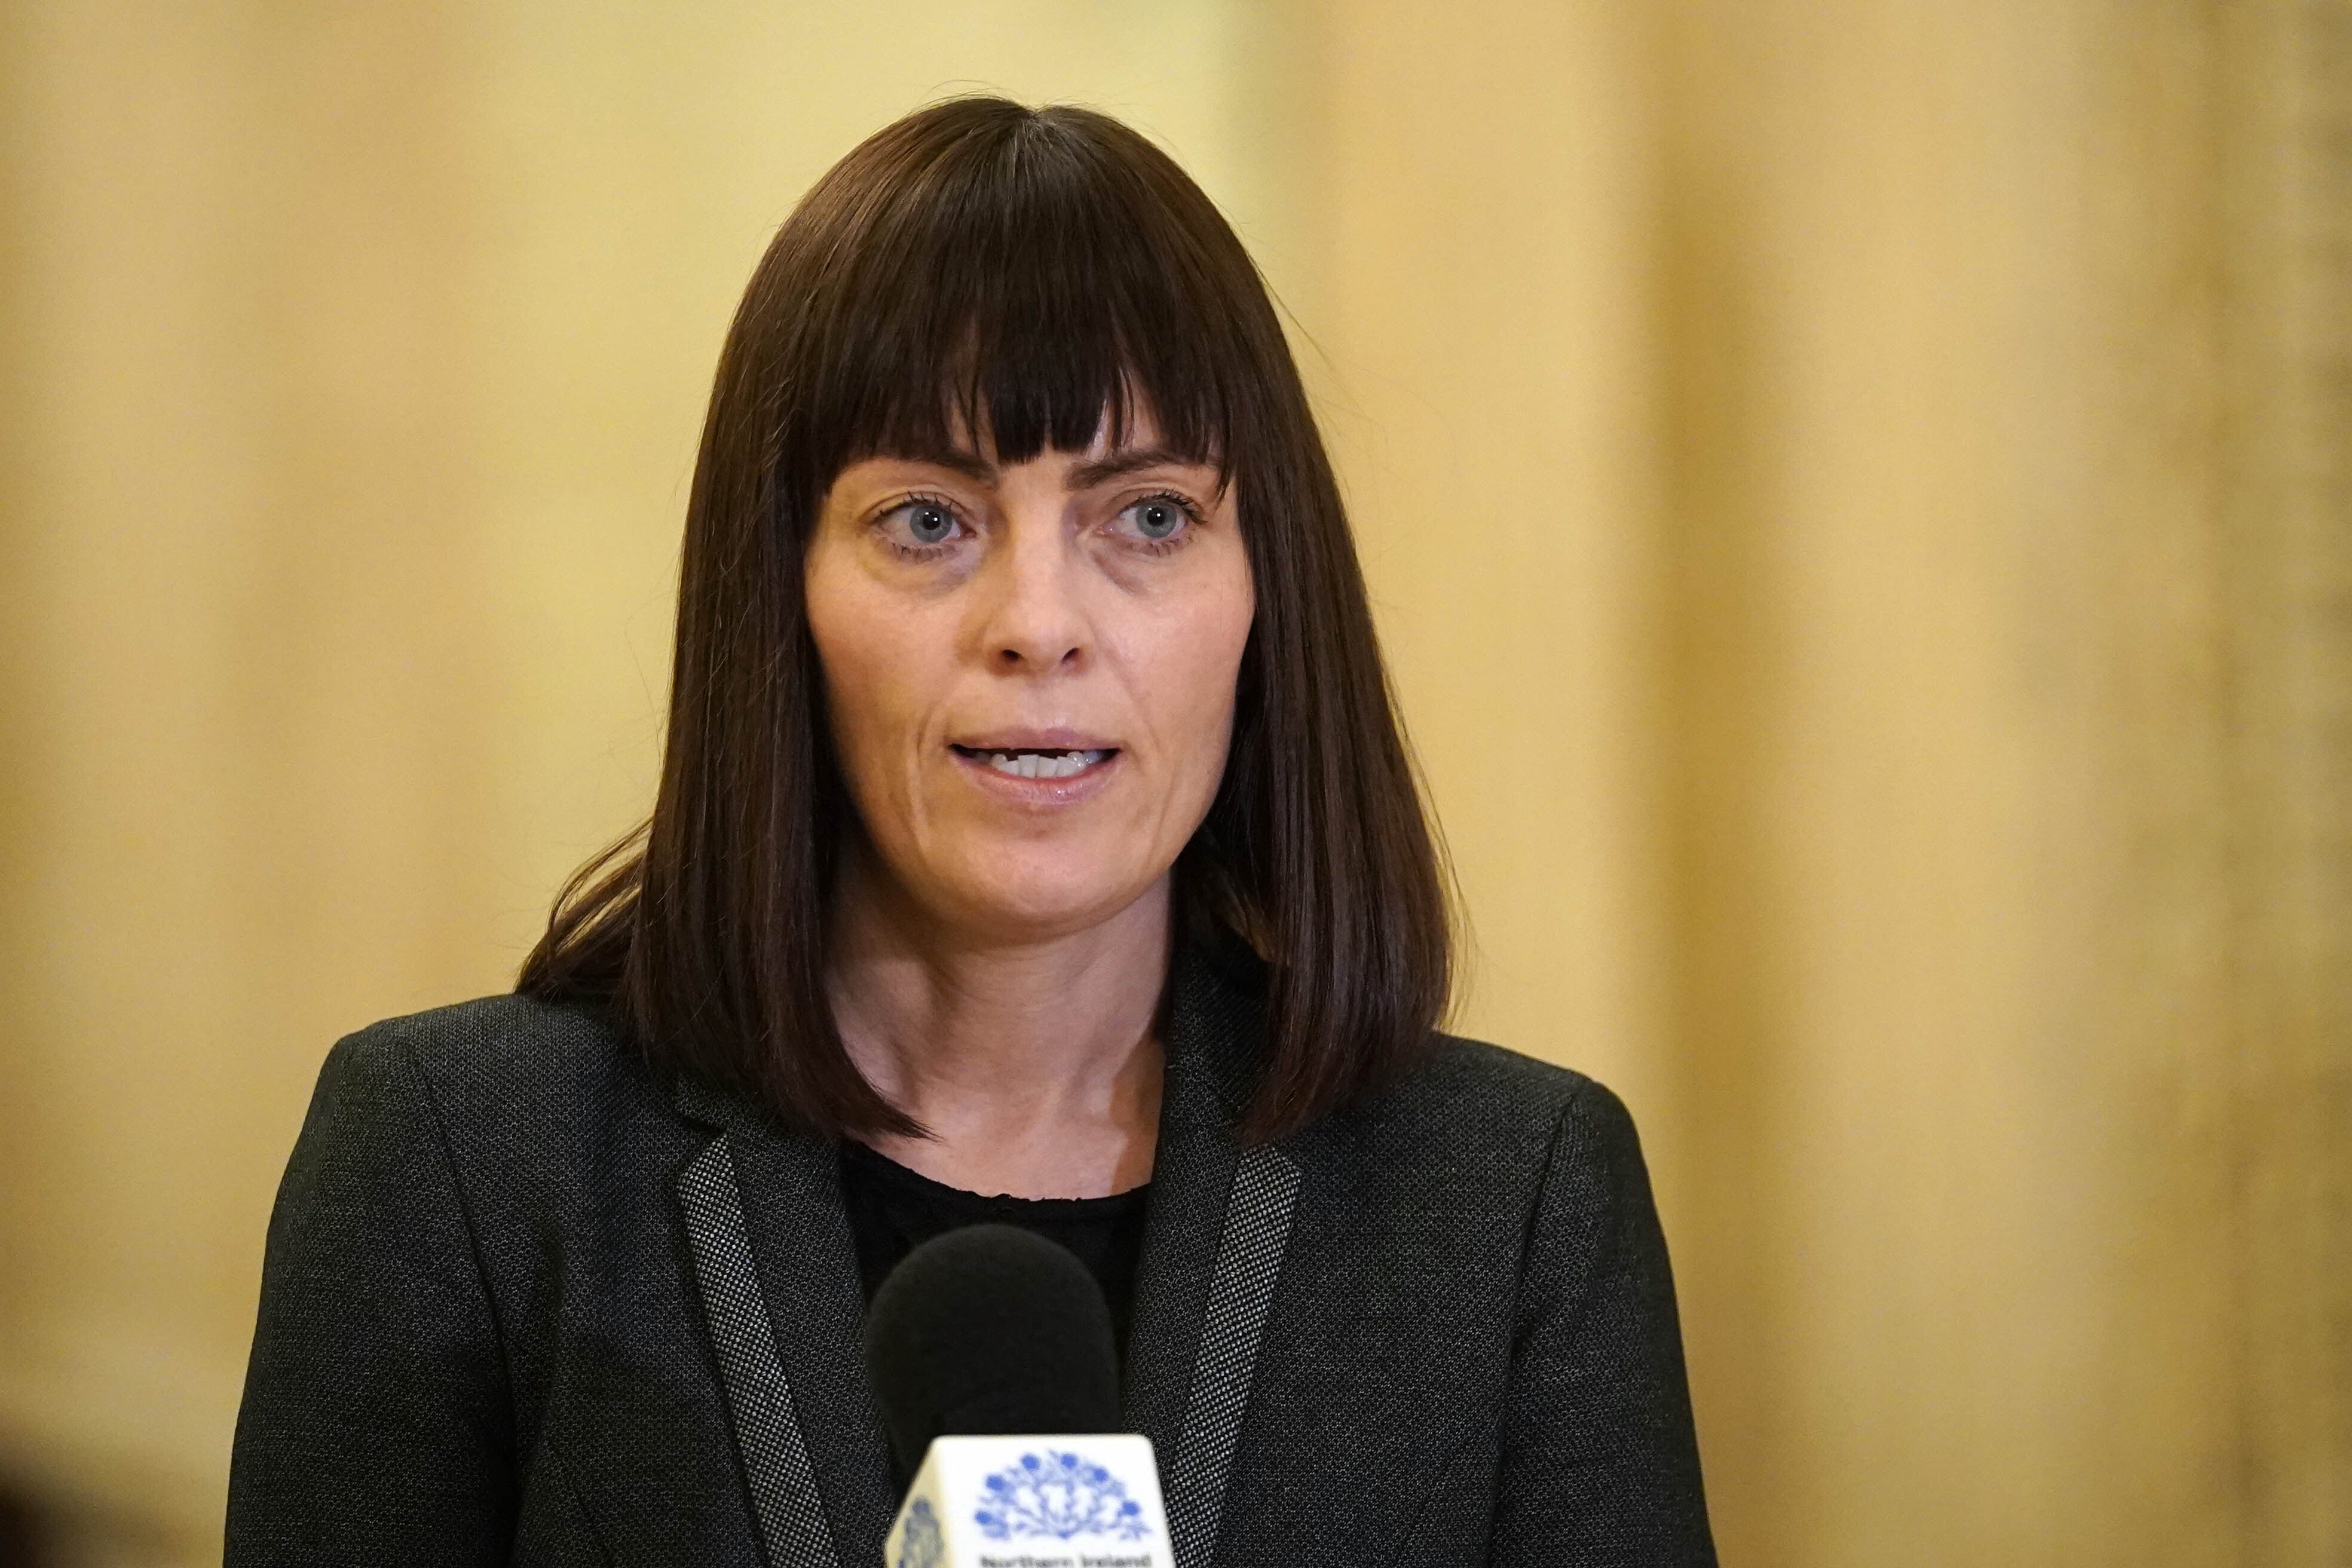 SDLP infrastructure minister Nichola Mallon said no apology could make up for the failures of the past (Niall Carson/PA)